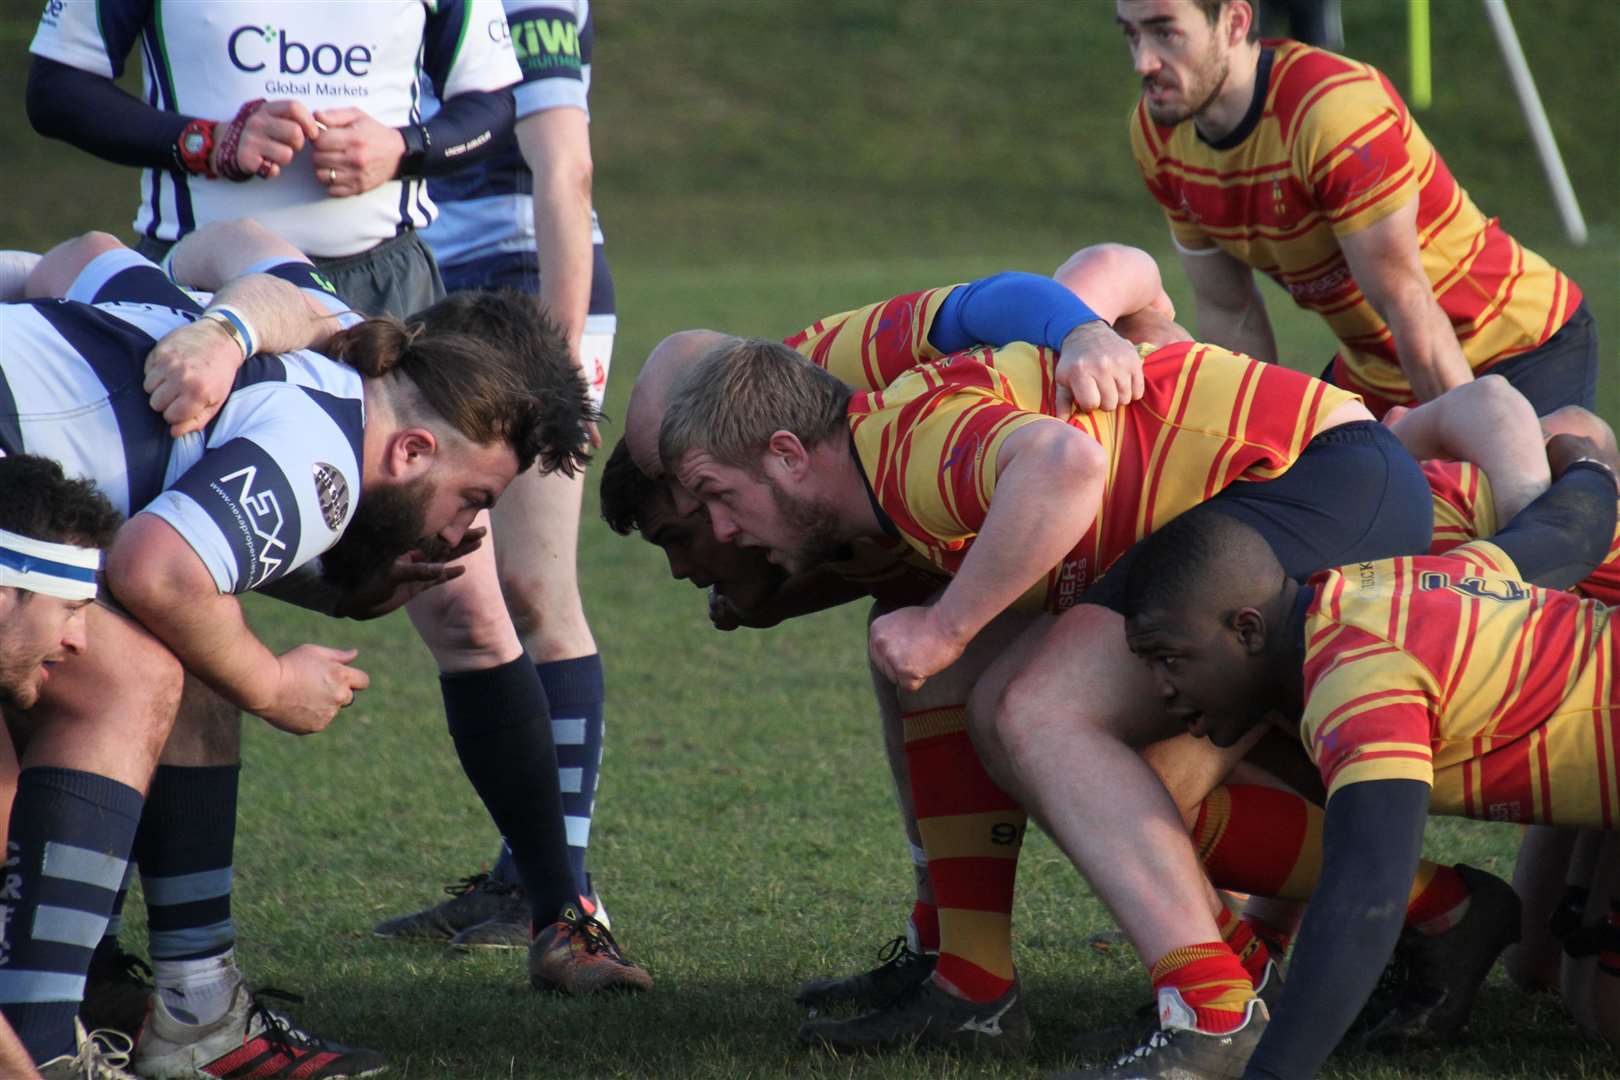 The teams gear up for a scrum as Medway take on Chichester. Picture: Paul Wardzynski